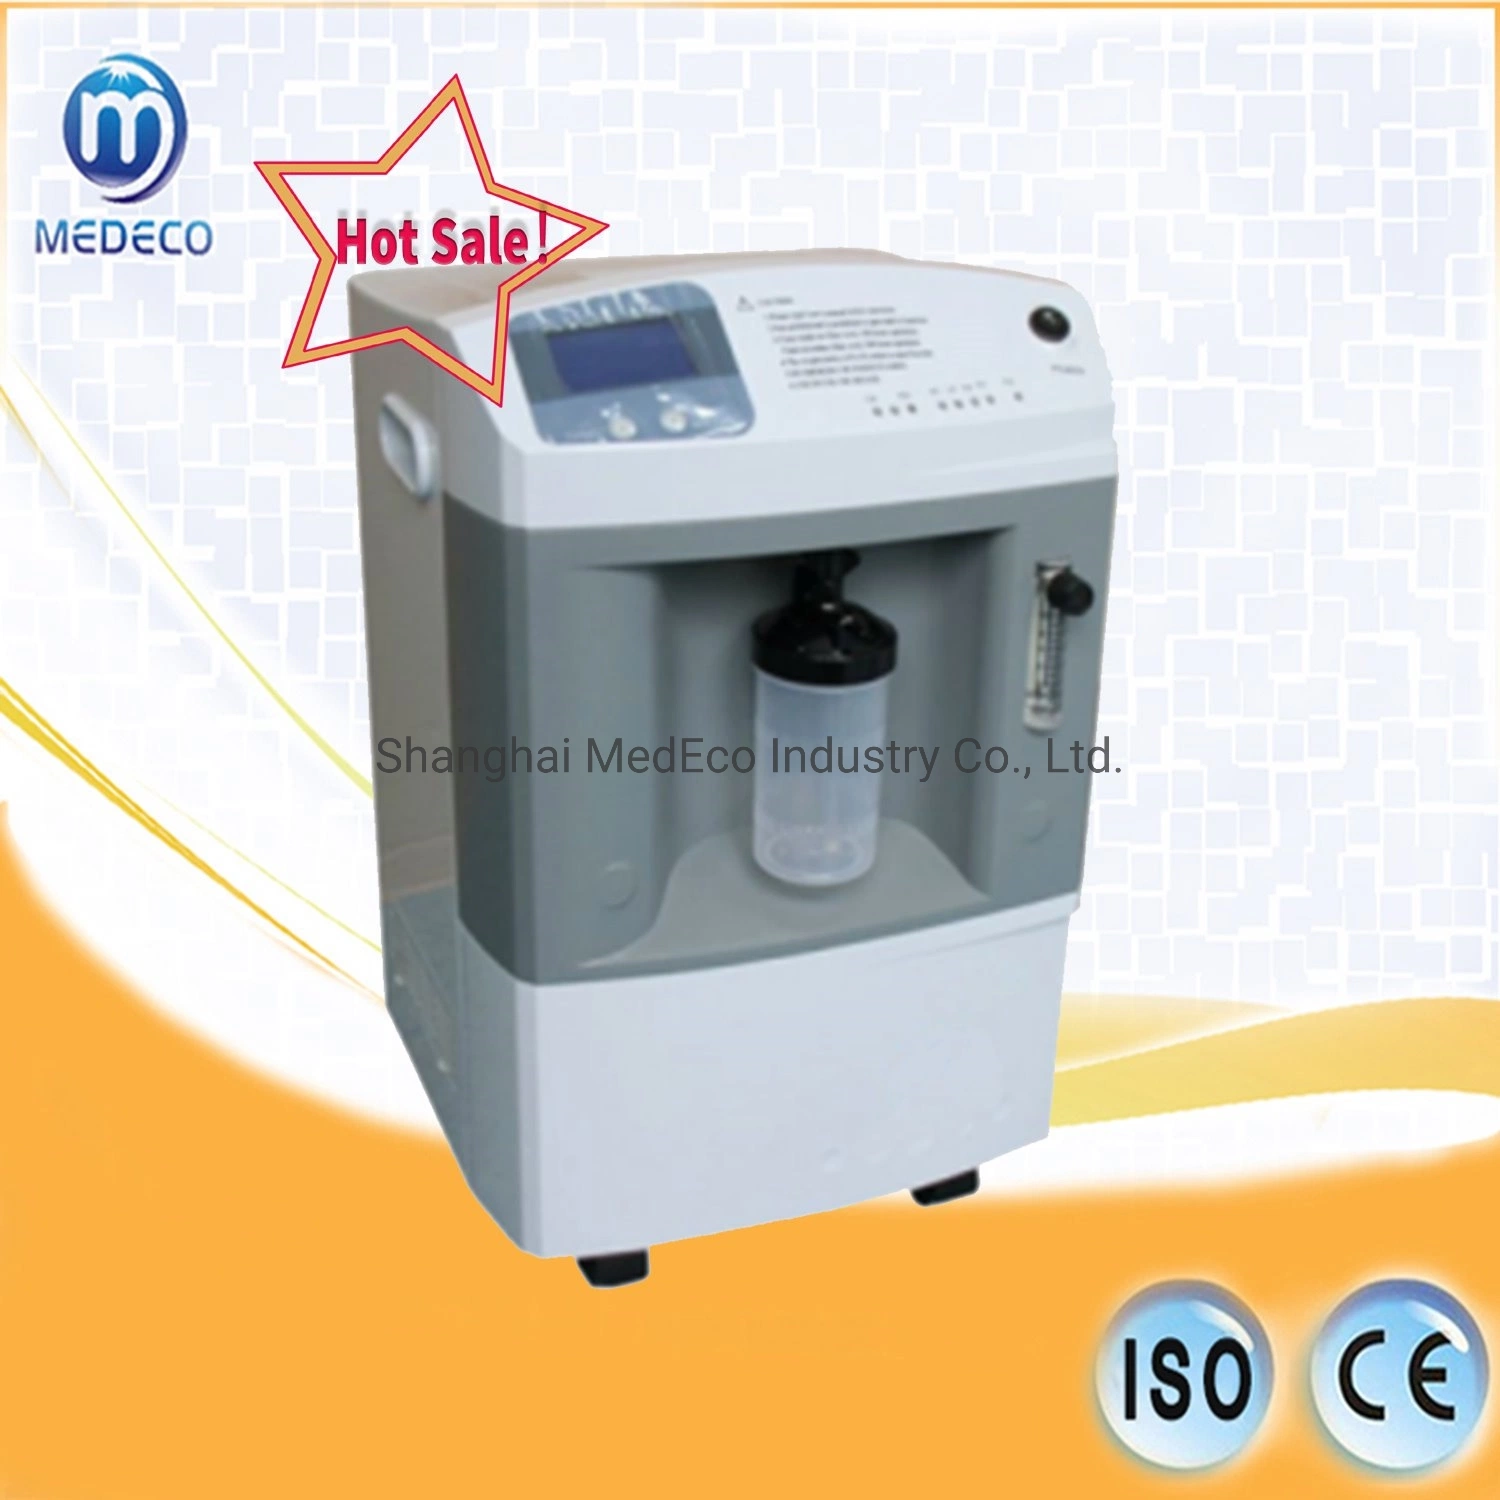 Homecare Oxygen Concentrator Hospital Oxygen Machine Medical Treatment Supplies Mey-5bw